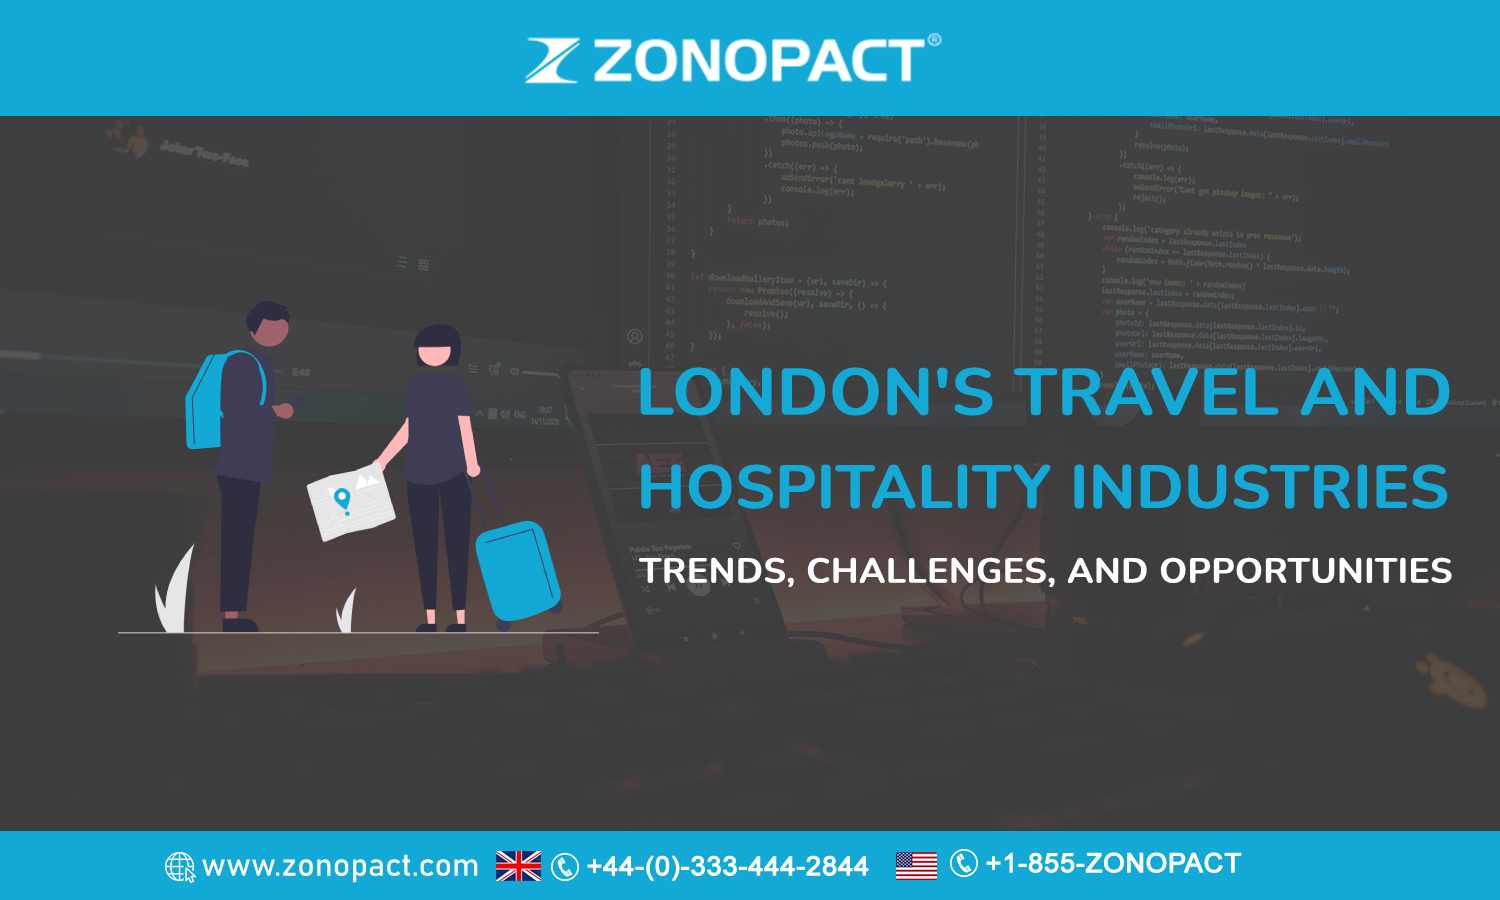 London's Travel and Hospitality Industries Trends, Challenges, and Opportunities